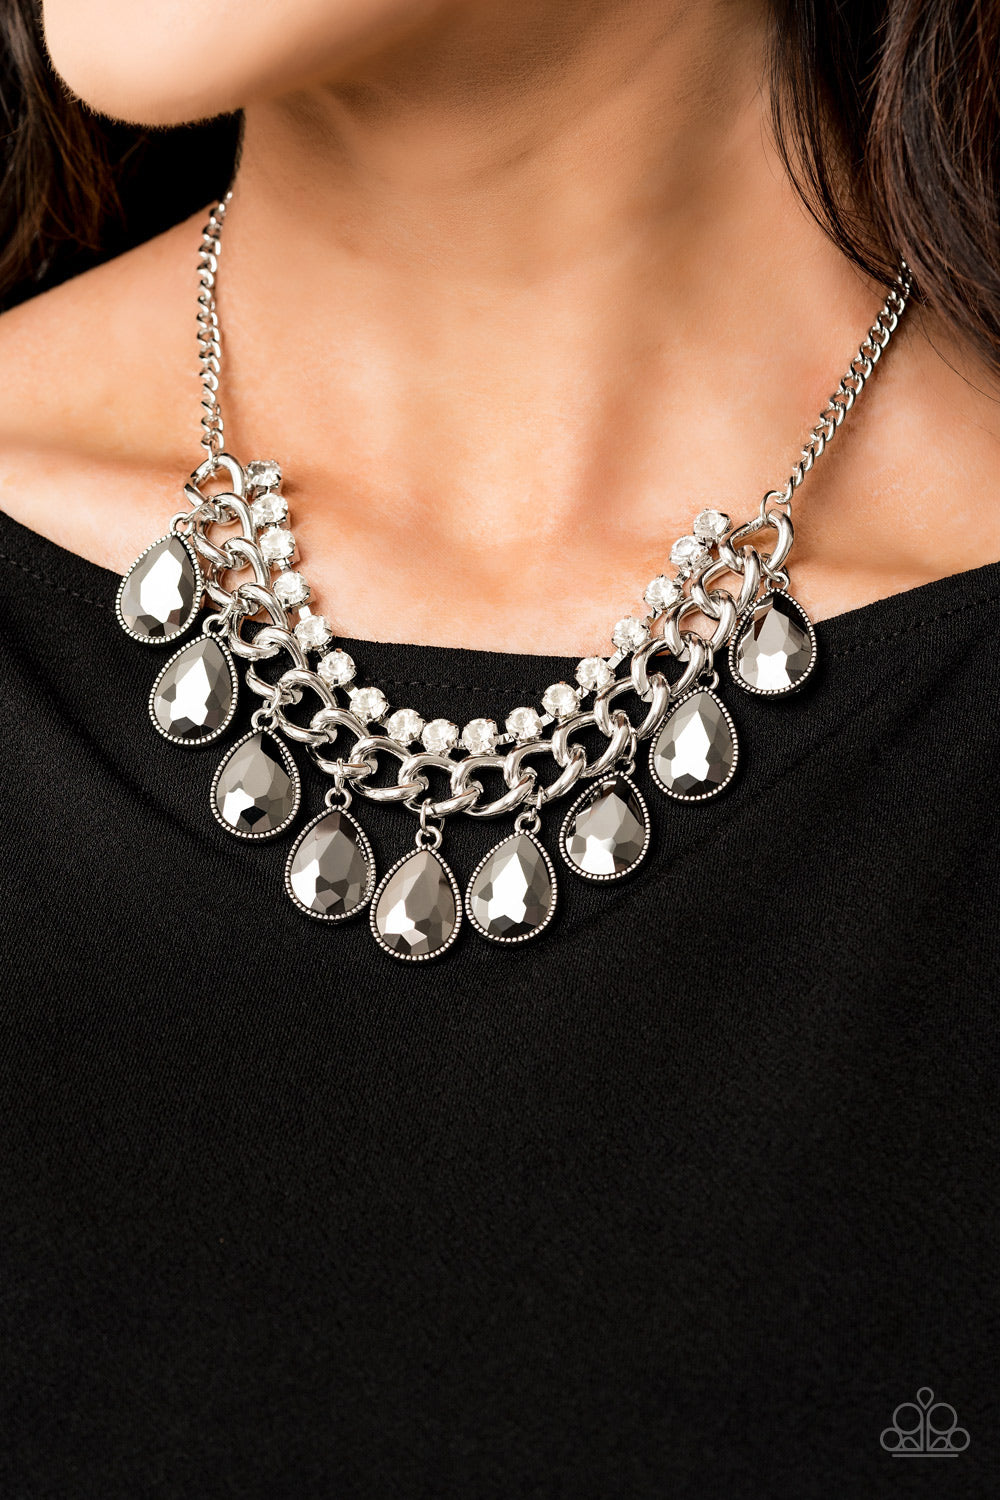 All Toget-HEIR Now - Silver - Necklace - Paparazzi Accessories